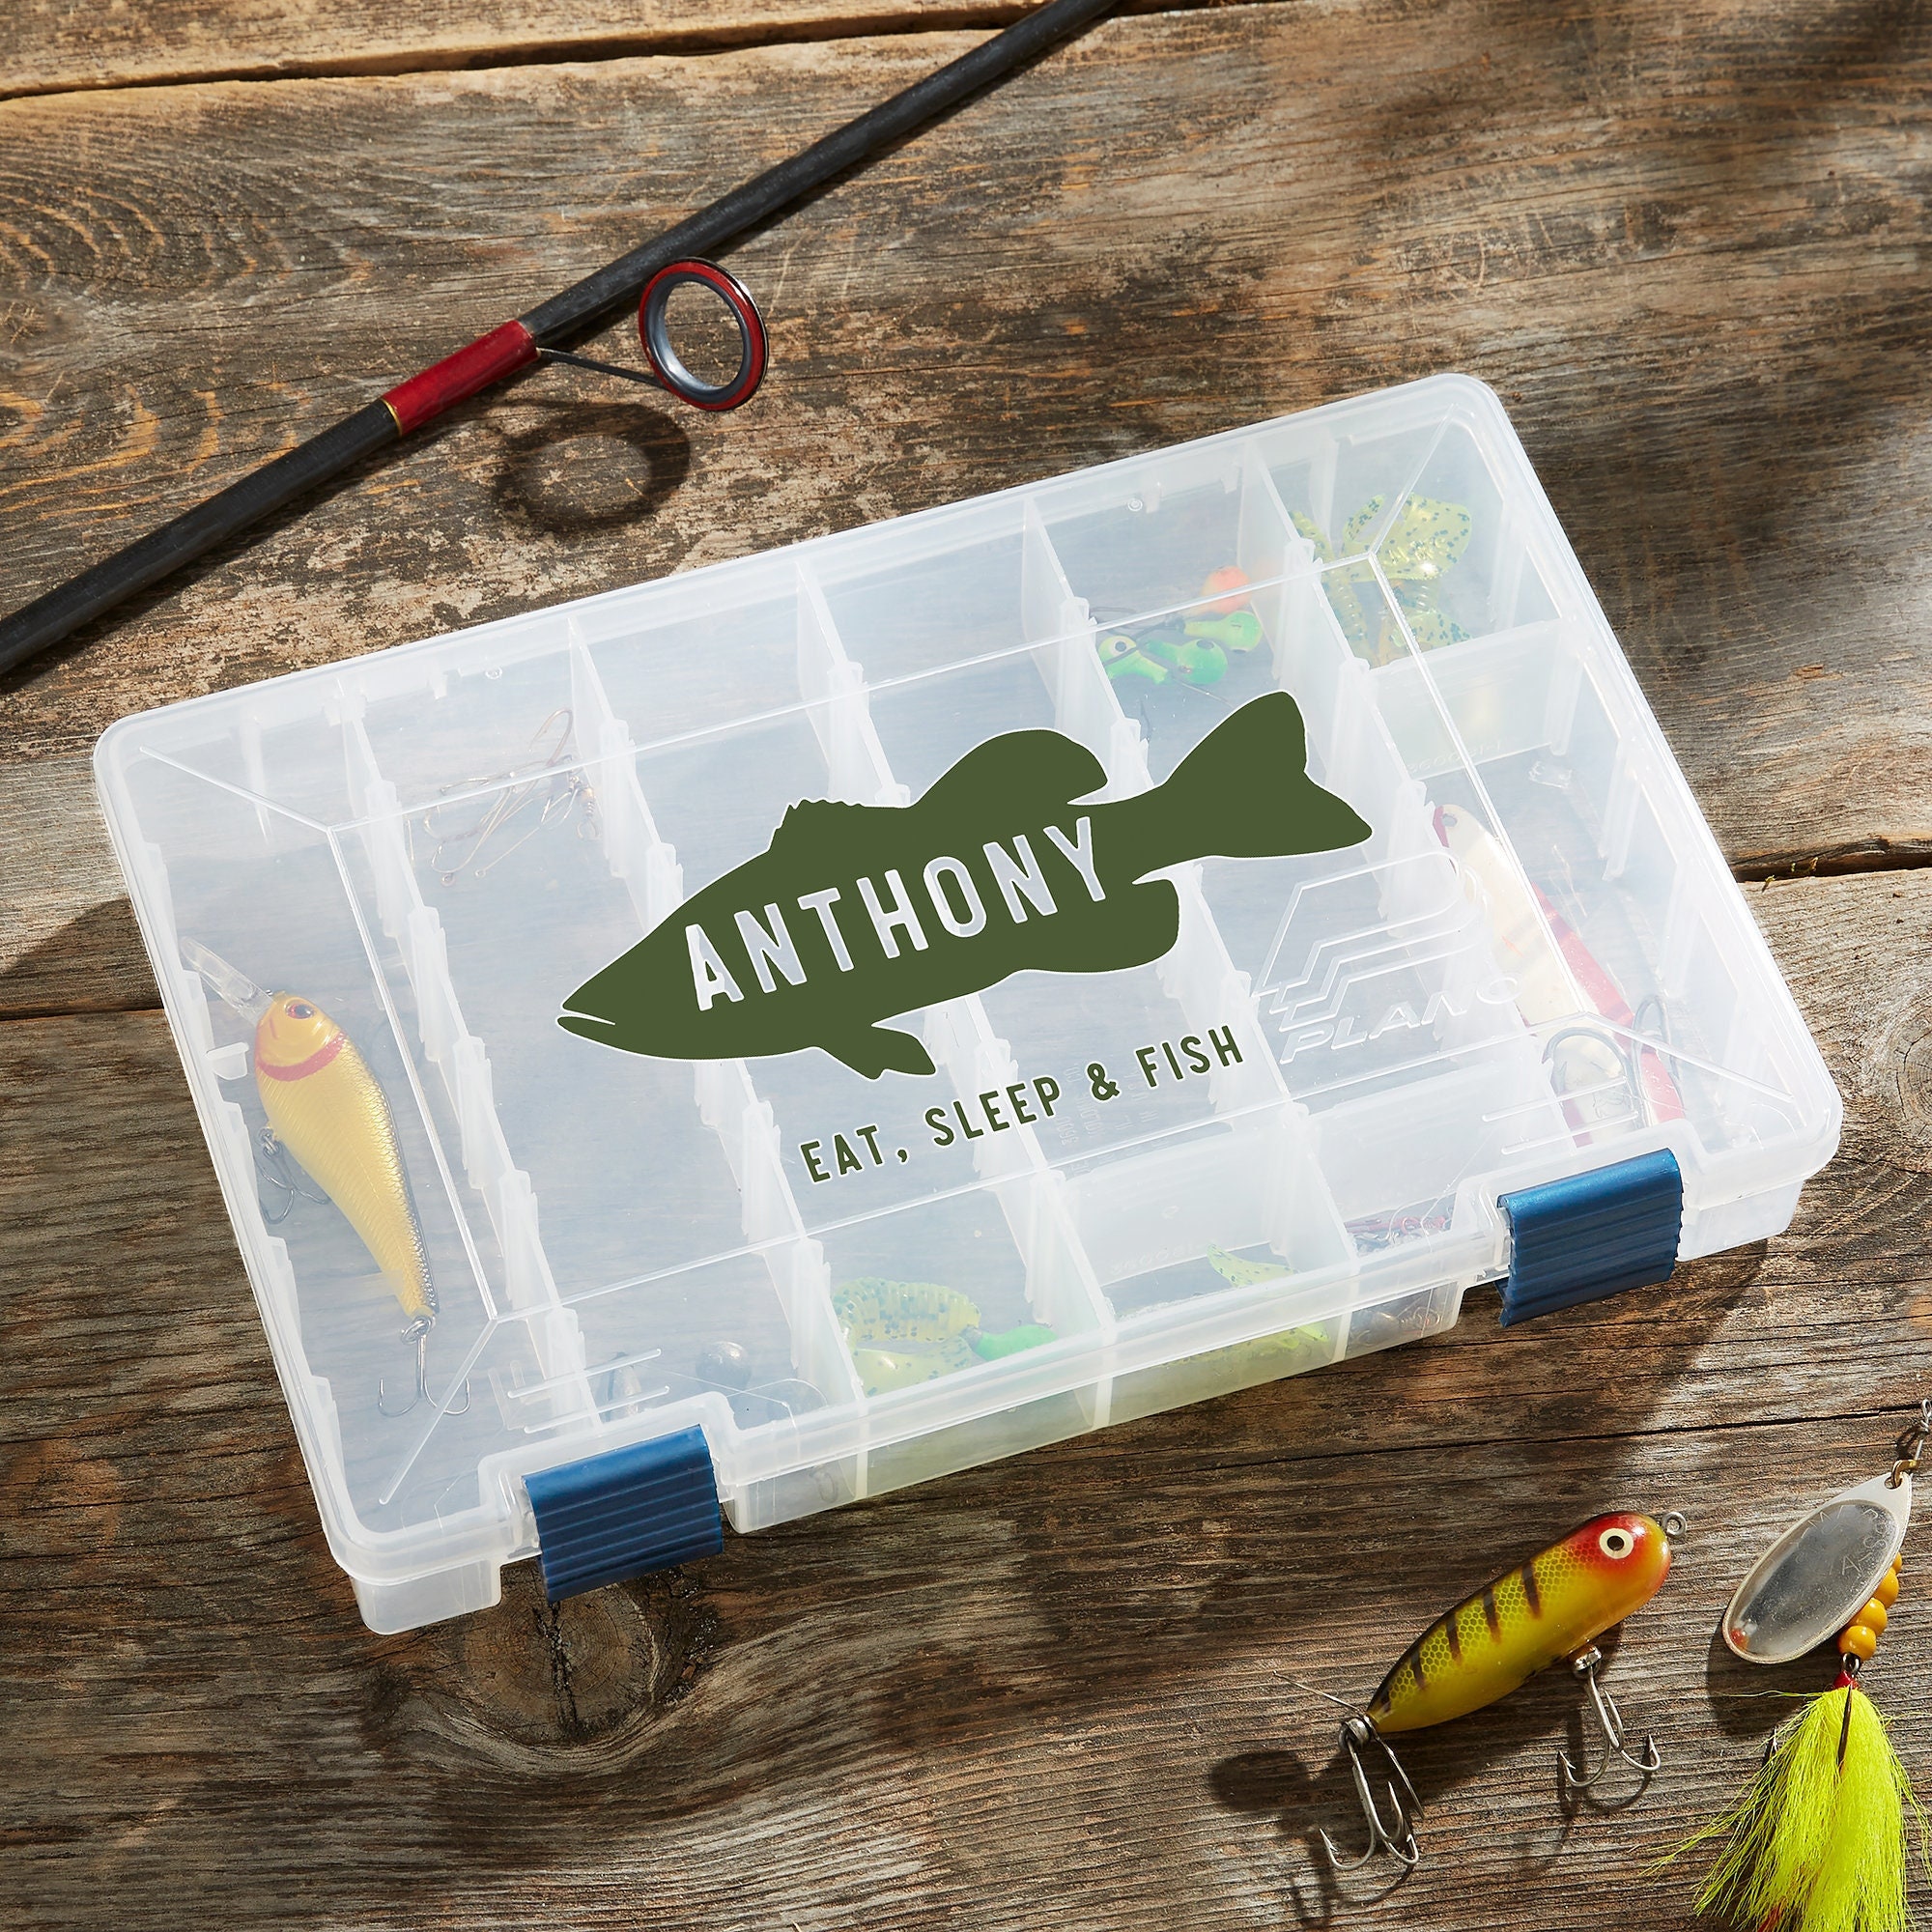 Fish Name Personalized Tackle Fishing Box, Storage Box, Gifts for Him,  Father's Day Gifts, Fisherman Gifts, Gift Ideas for Christmas -  Israel